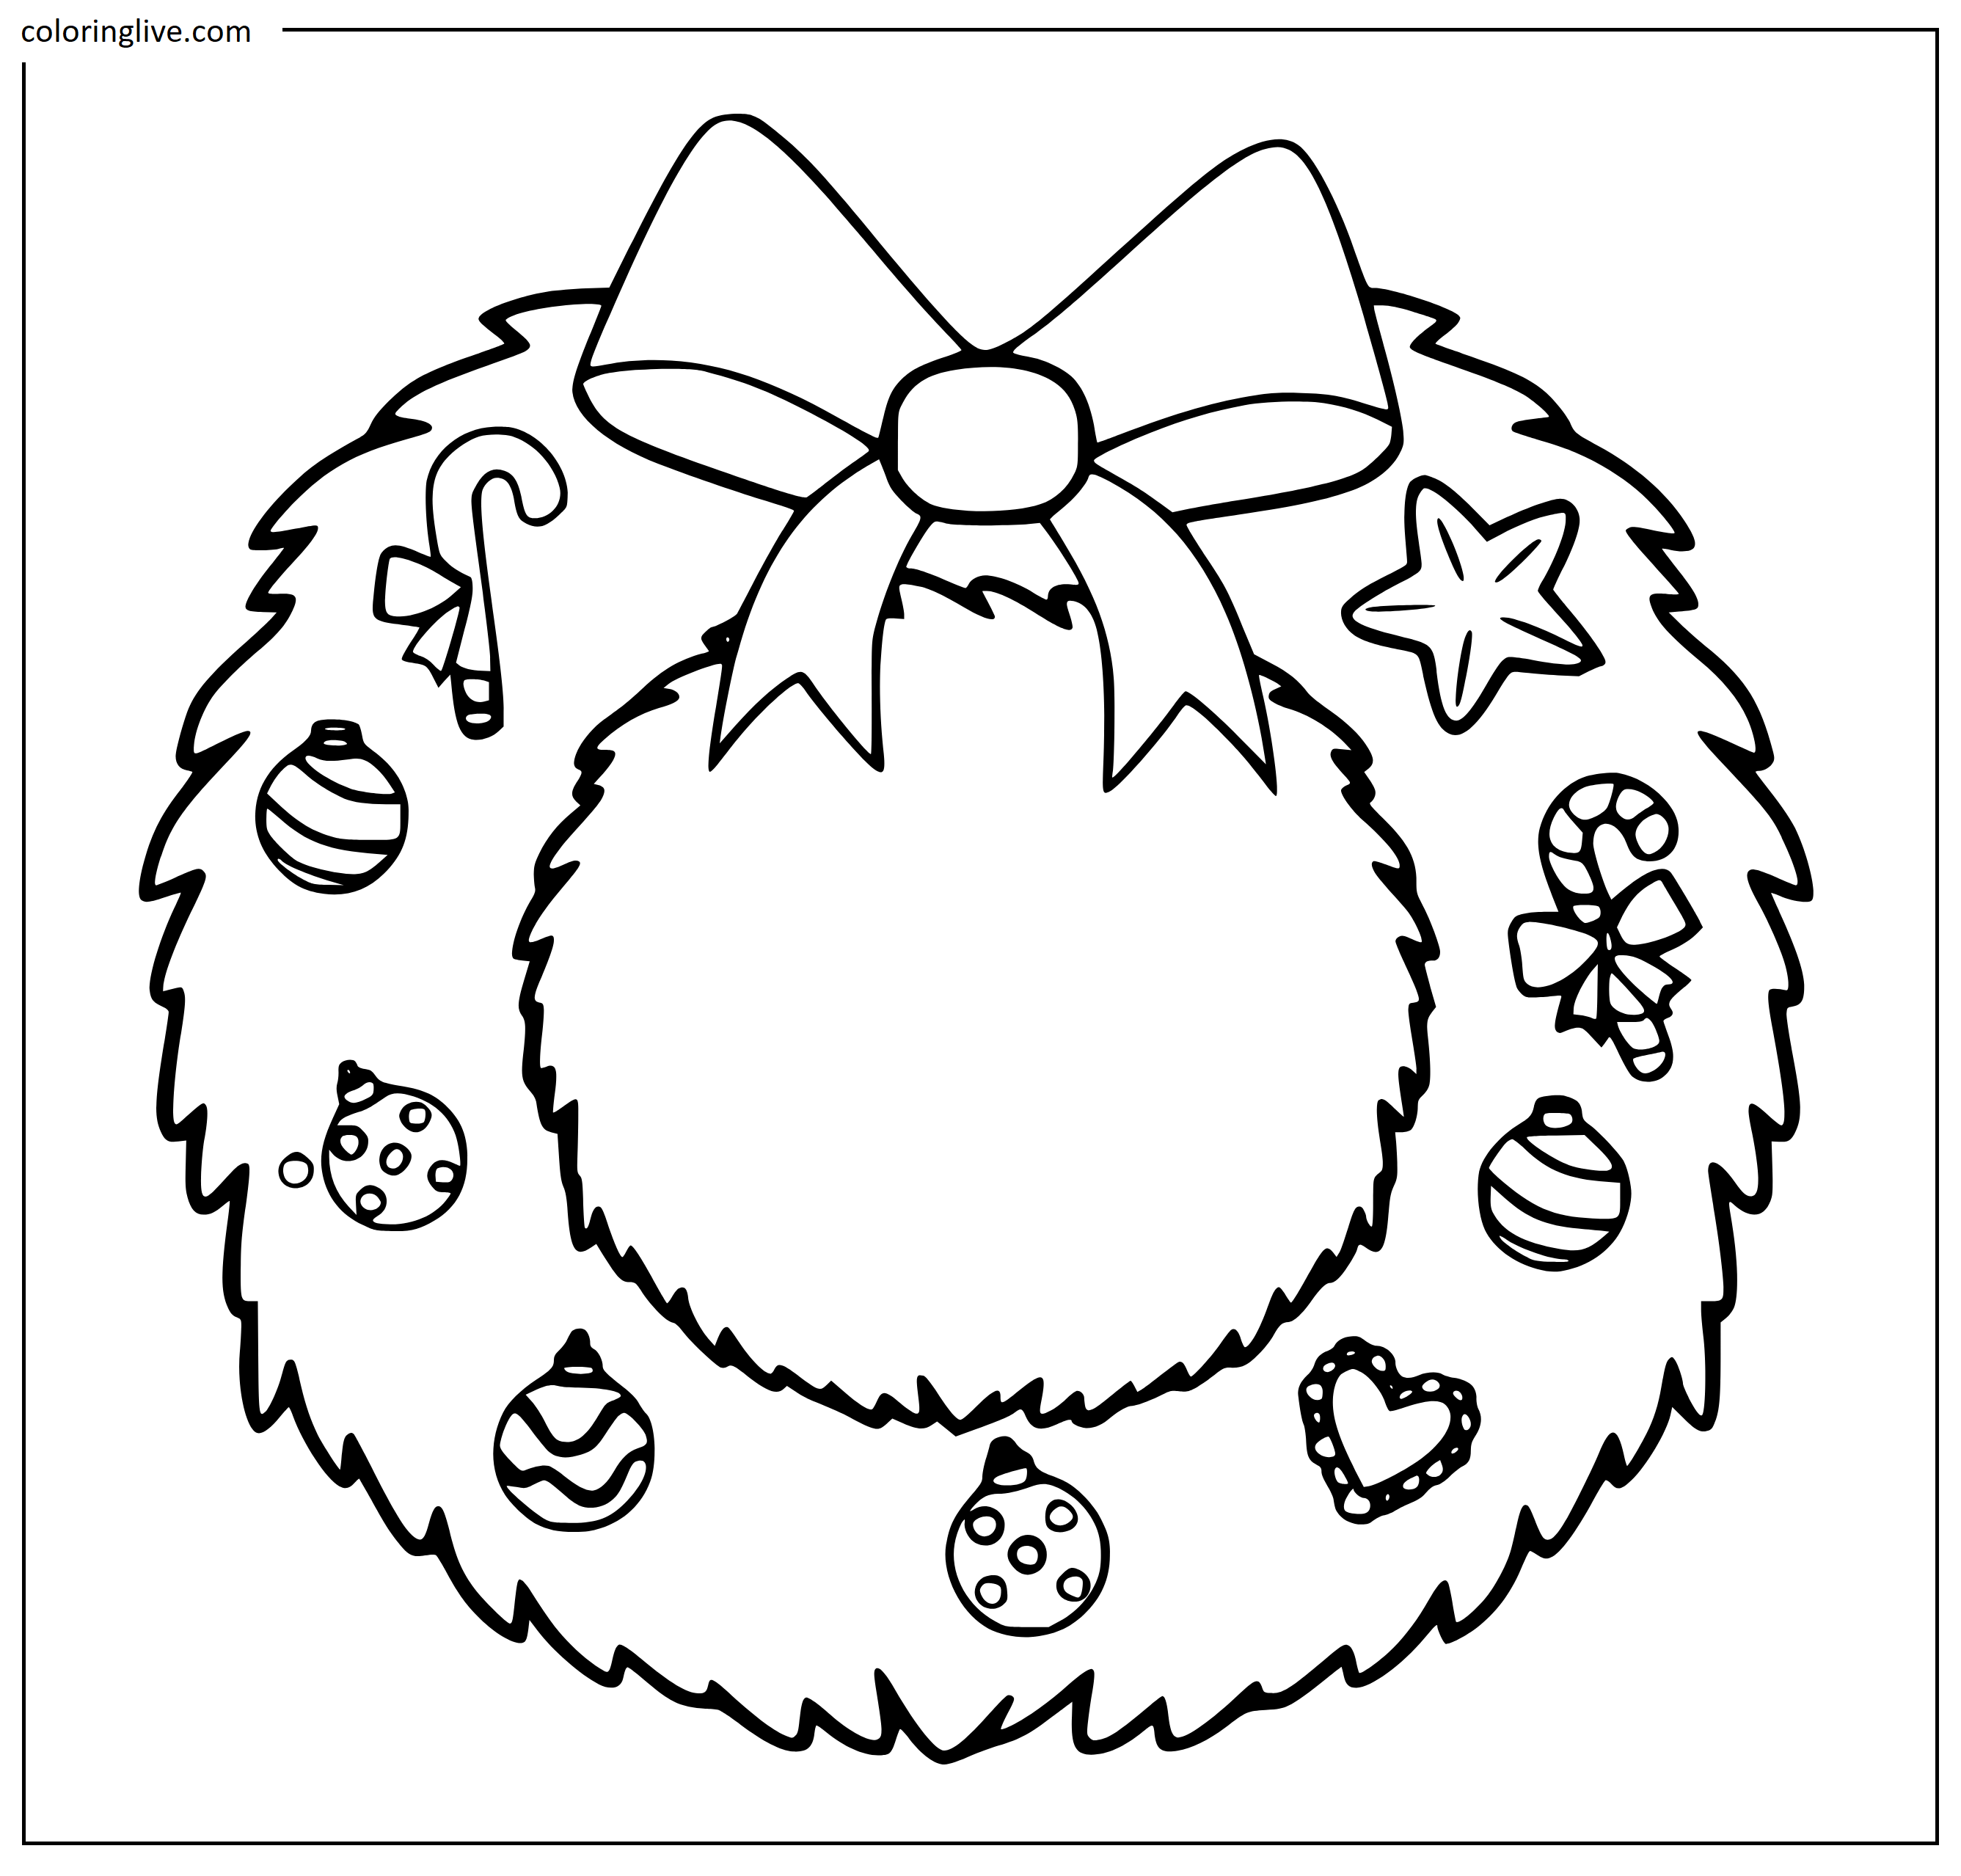 Printable Christmas Wreath to color Coloring Page for kids.